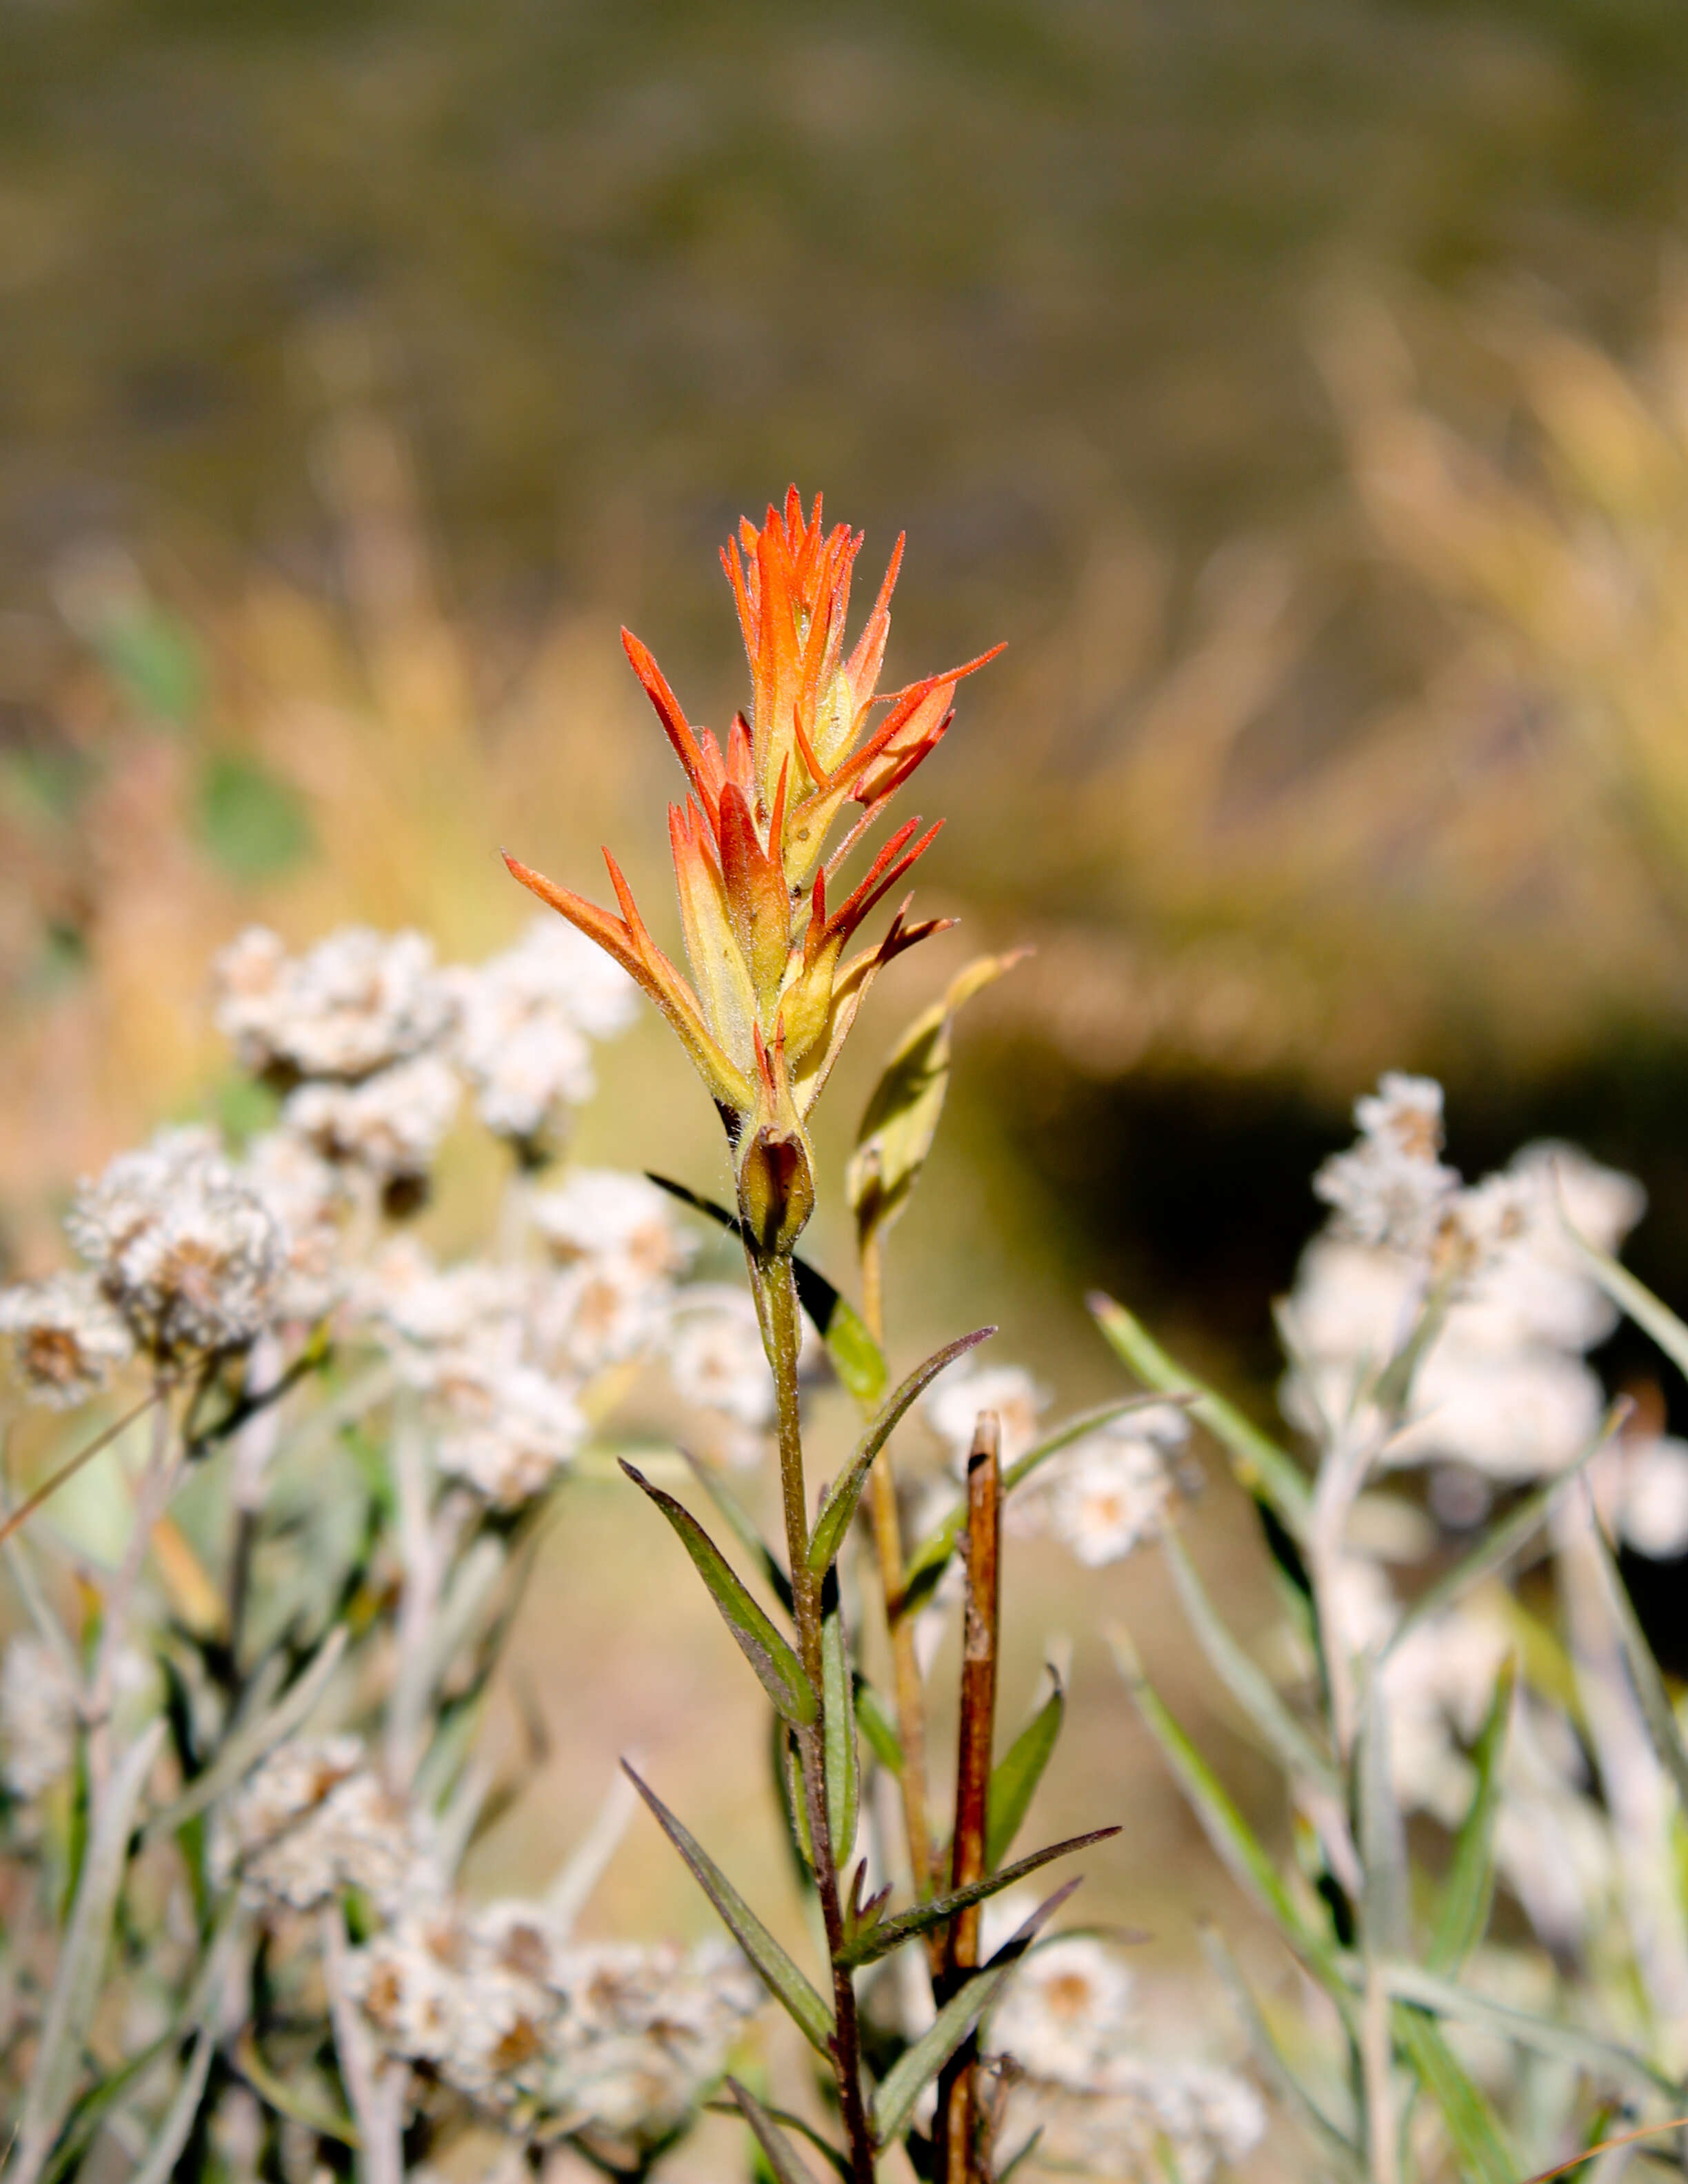 Image of giant red Indian paintbrush